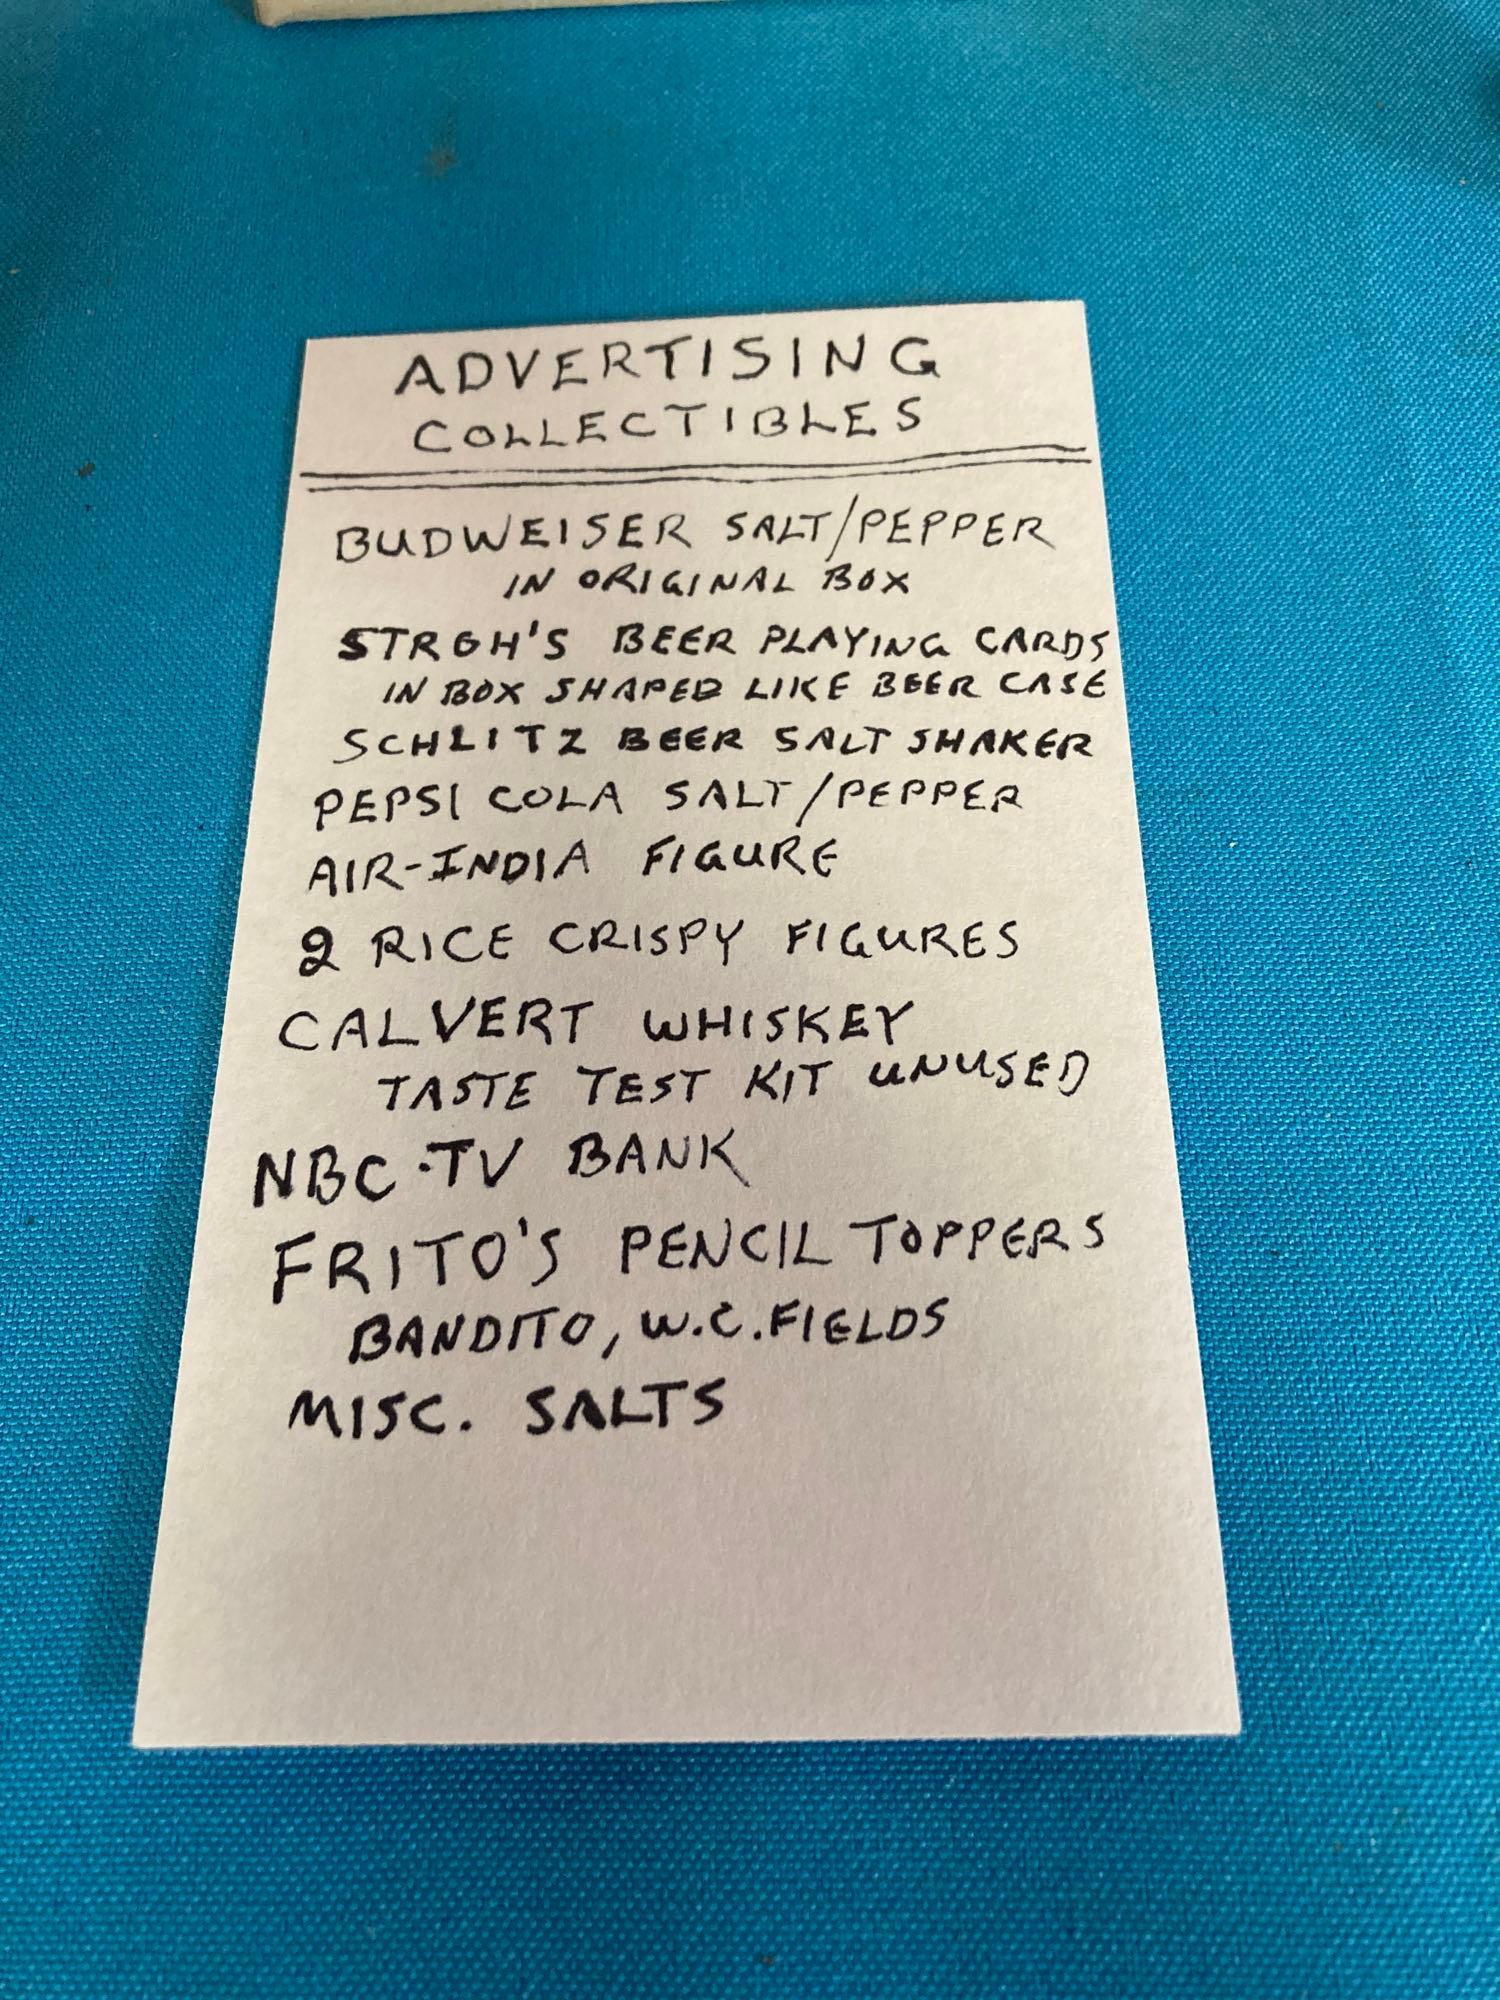 Advertising collectibles see list